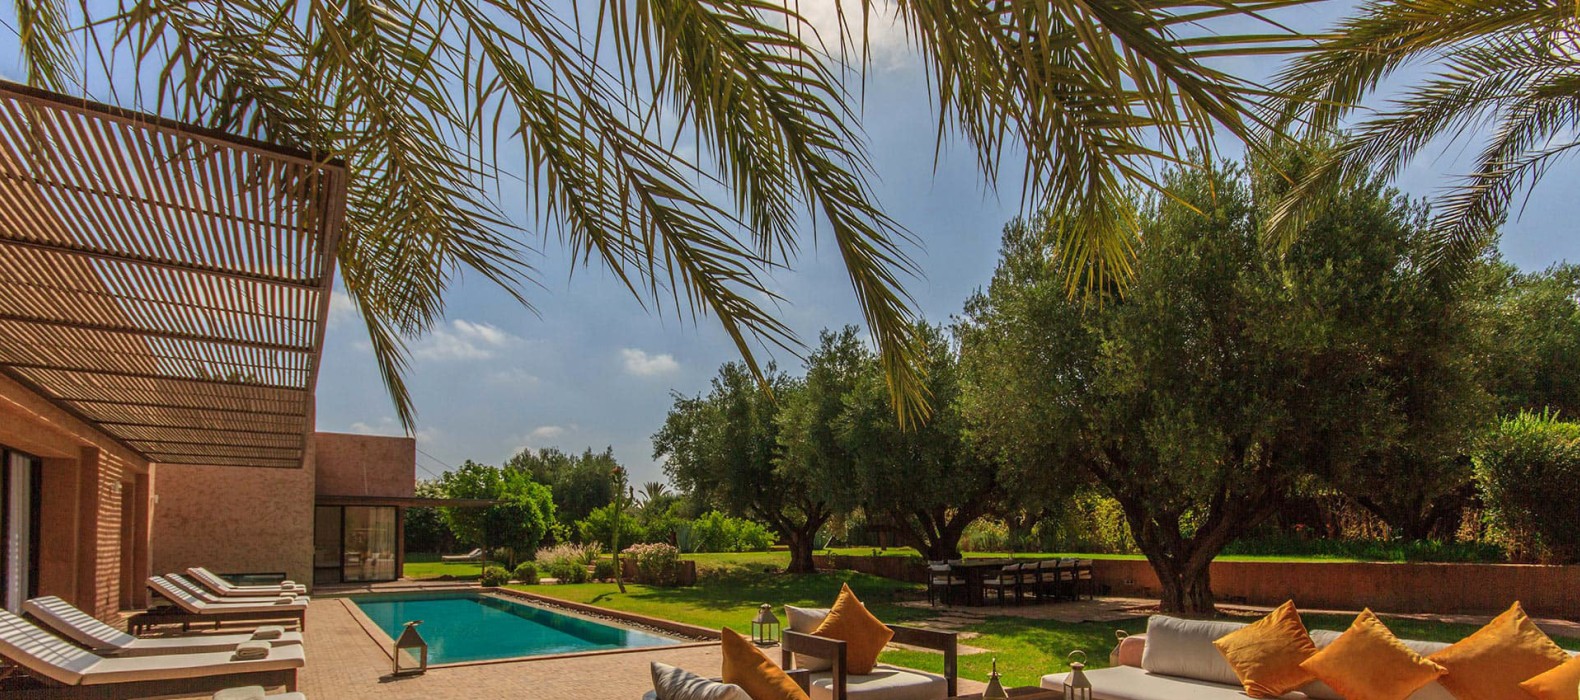 Chill area next to the pool of Villa Amourine in Marrakech